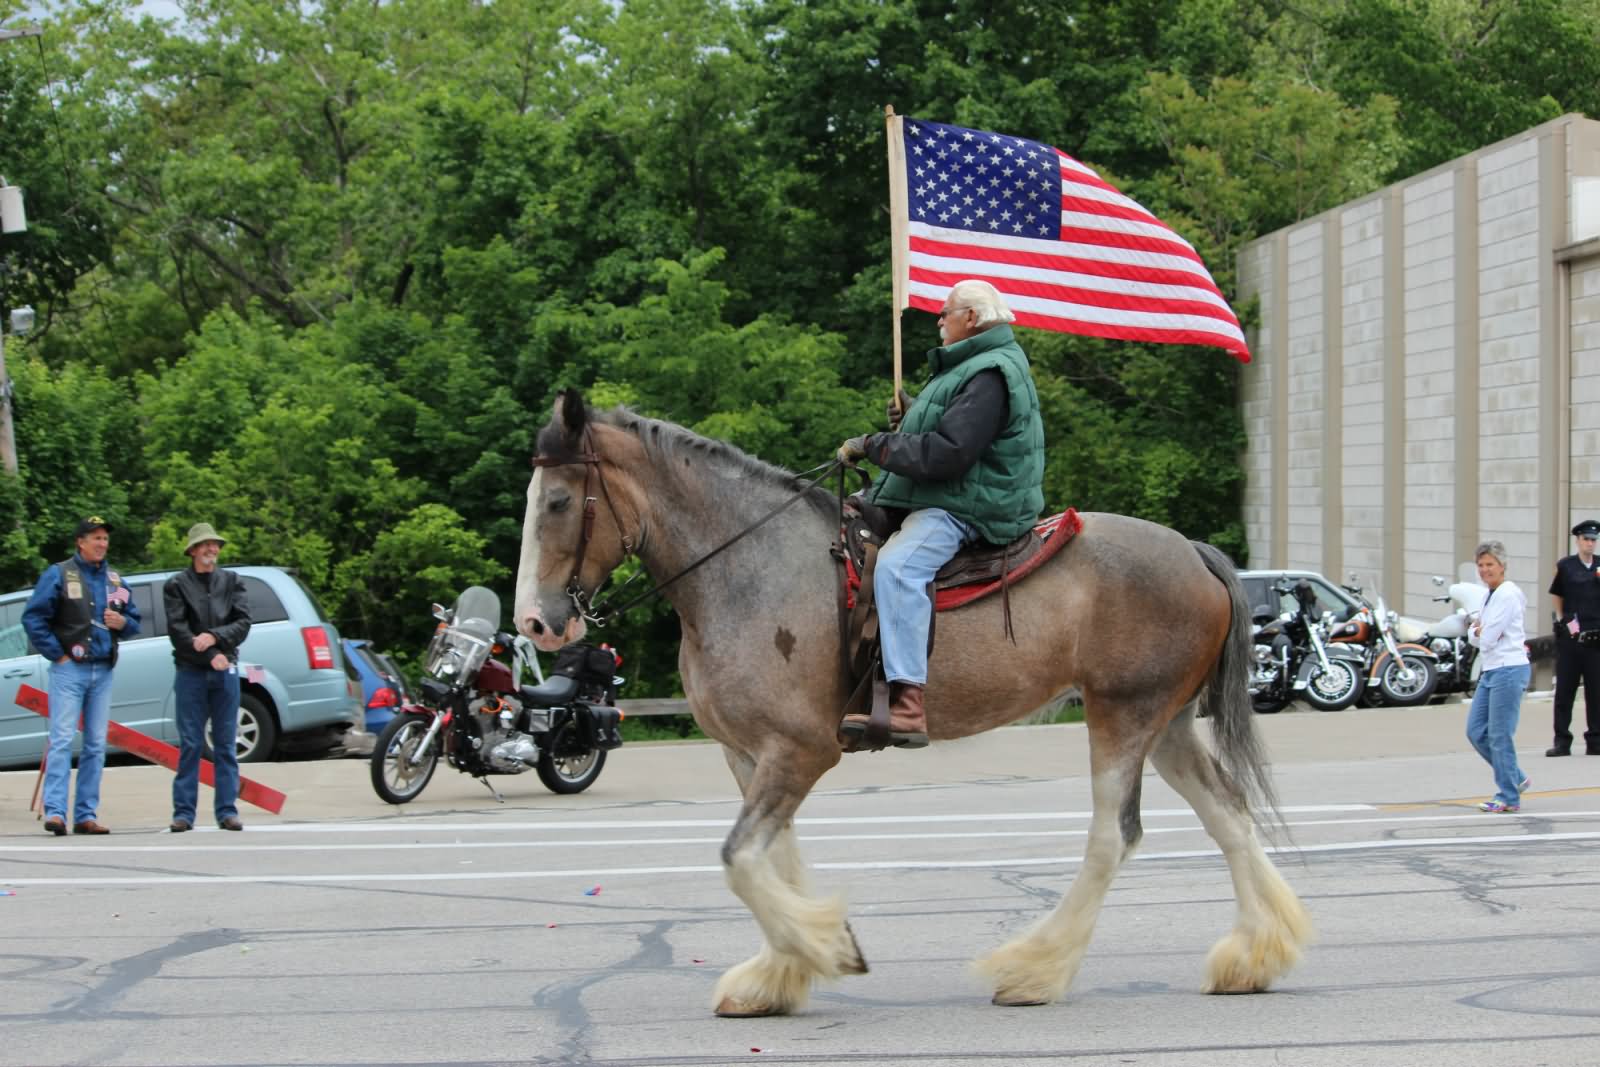 Man On Horse With American Flag During Memorial Day Parade